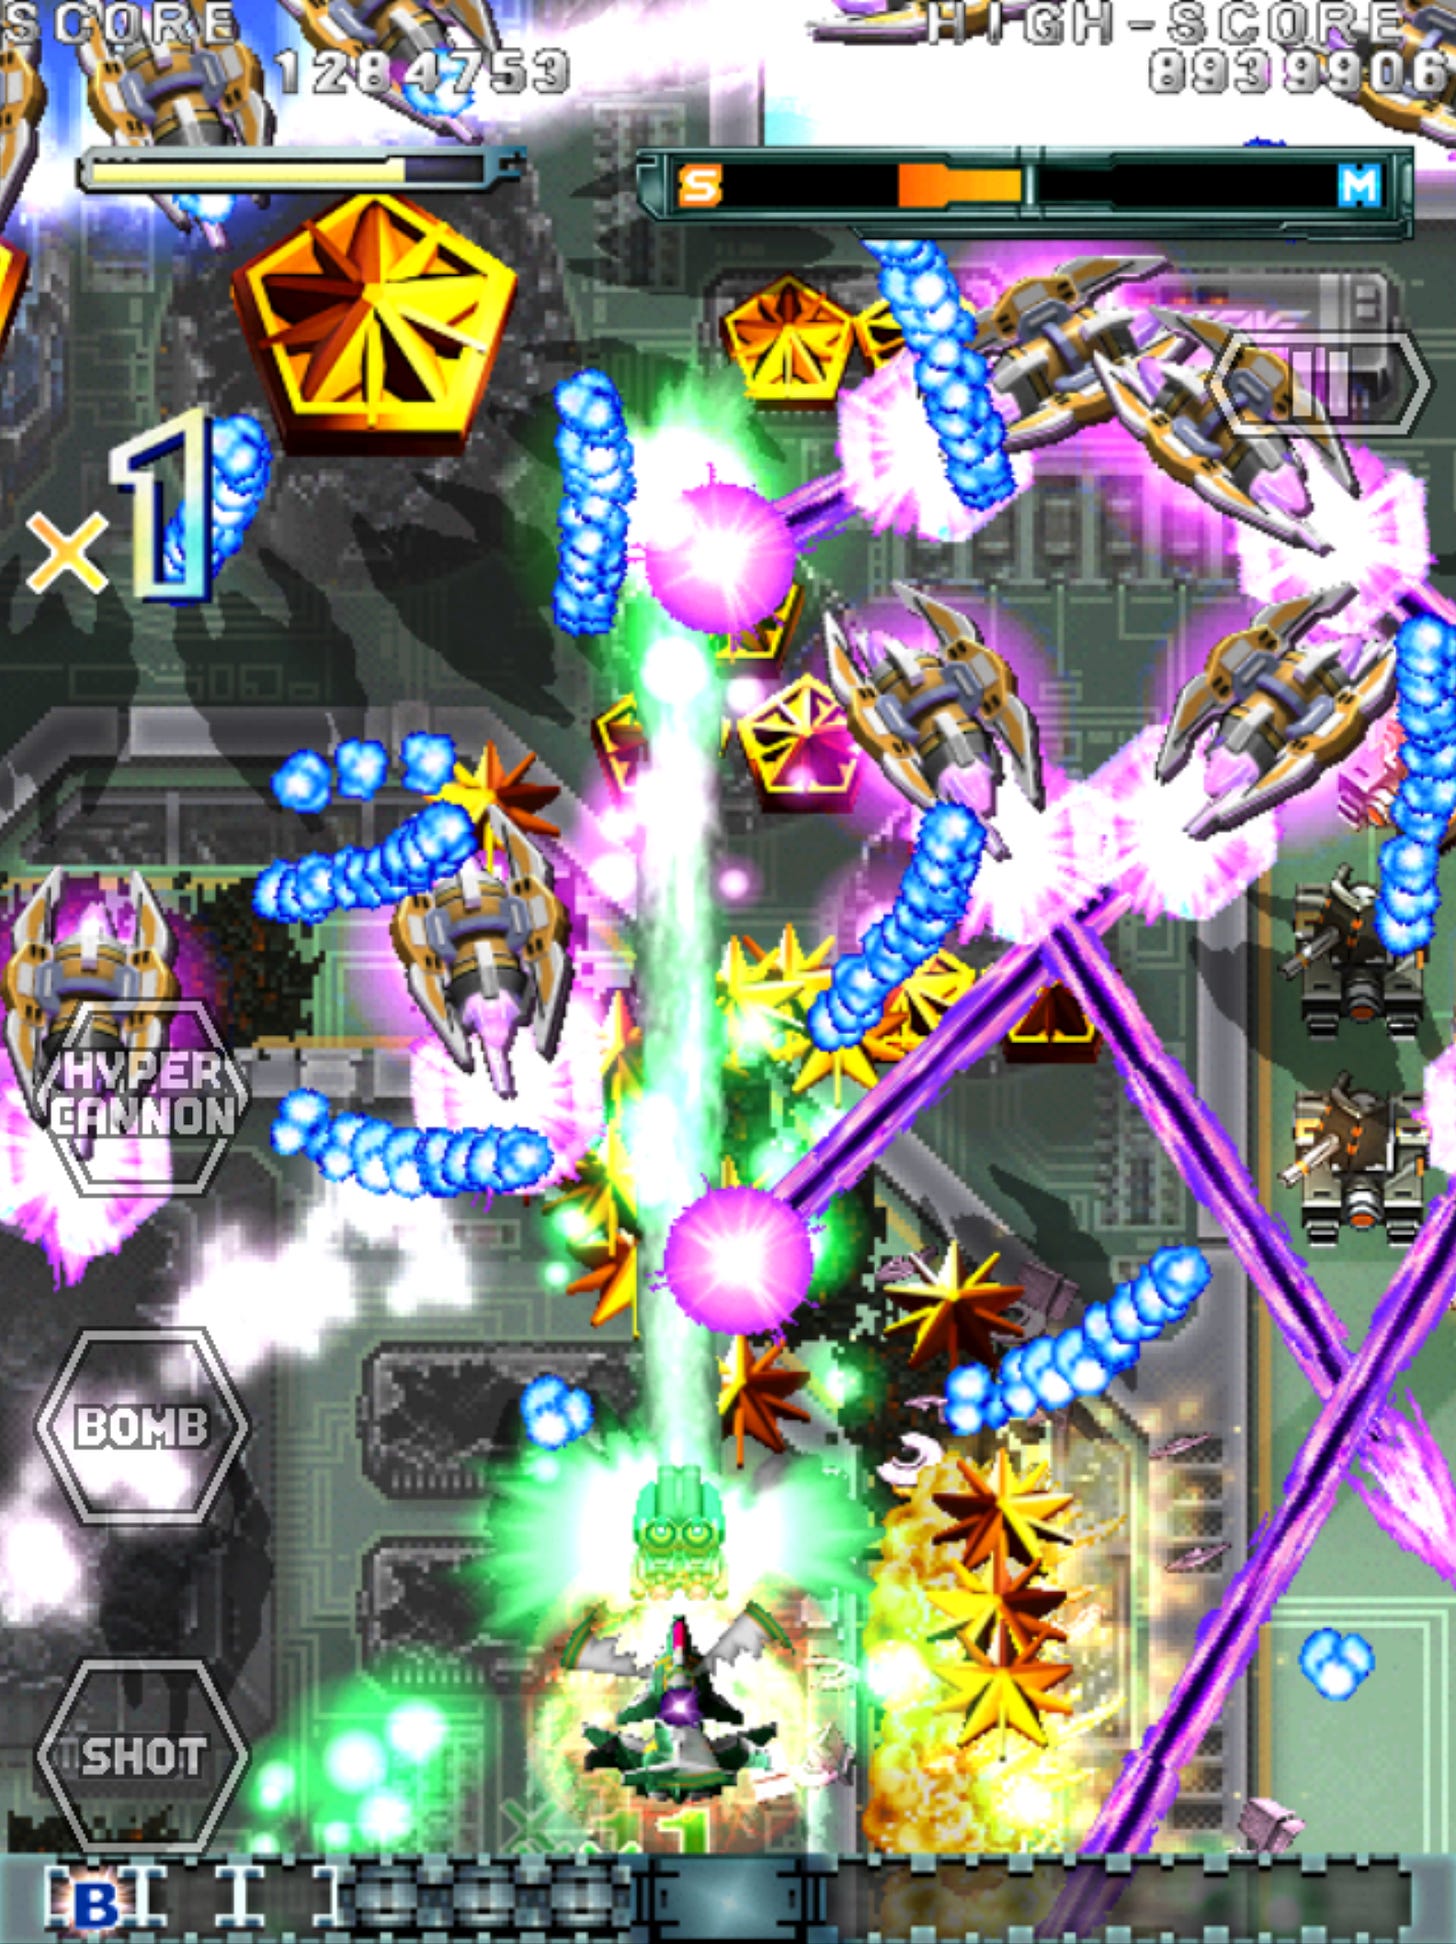 A screen filled with waves of blue bullets, purple and green lasers, and enemy ships